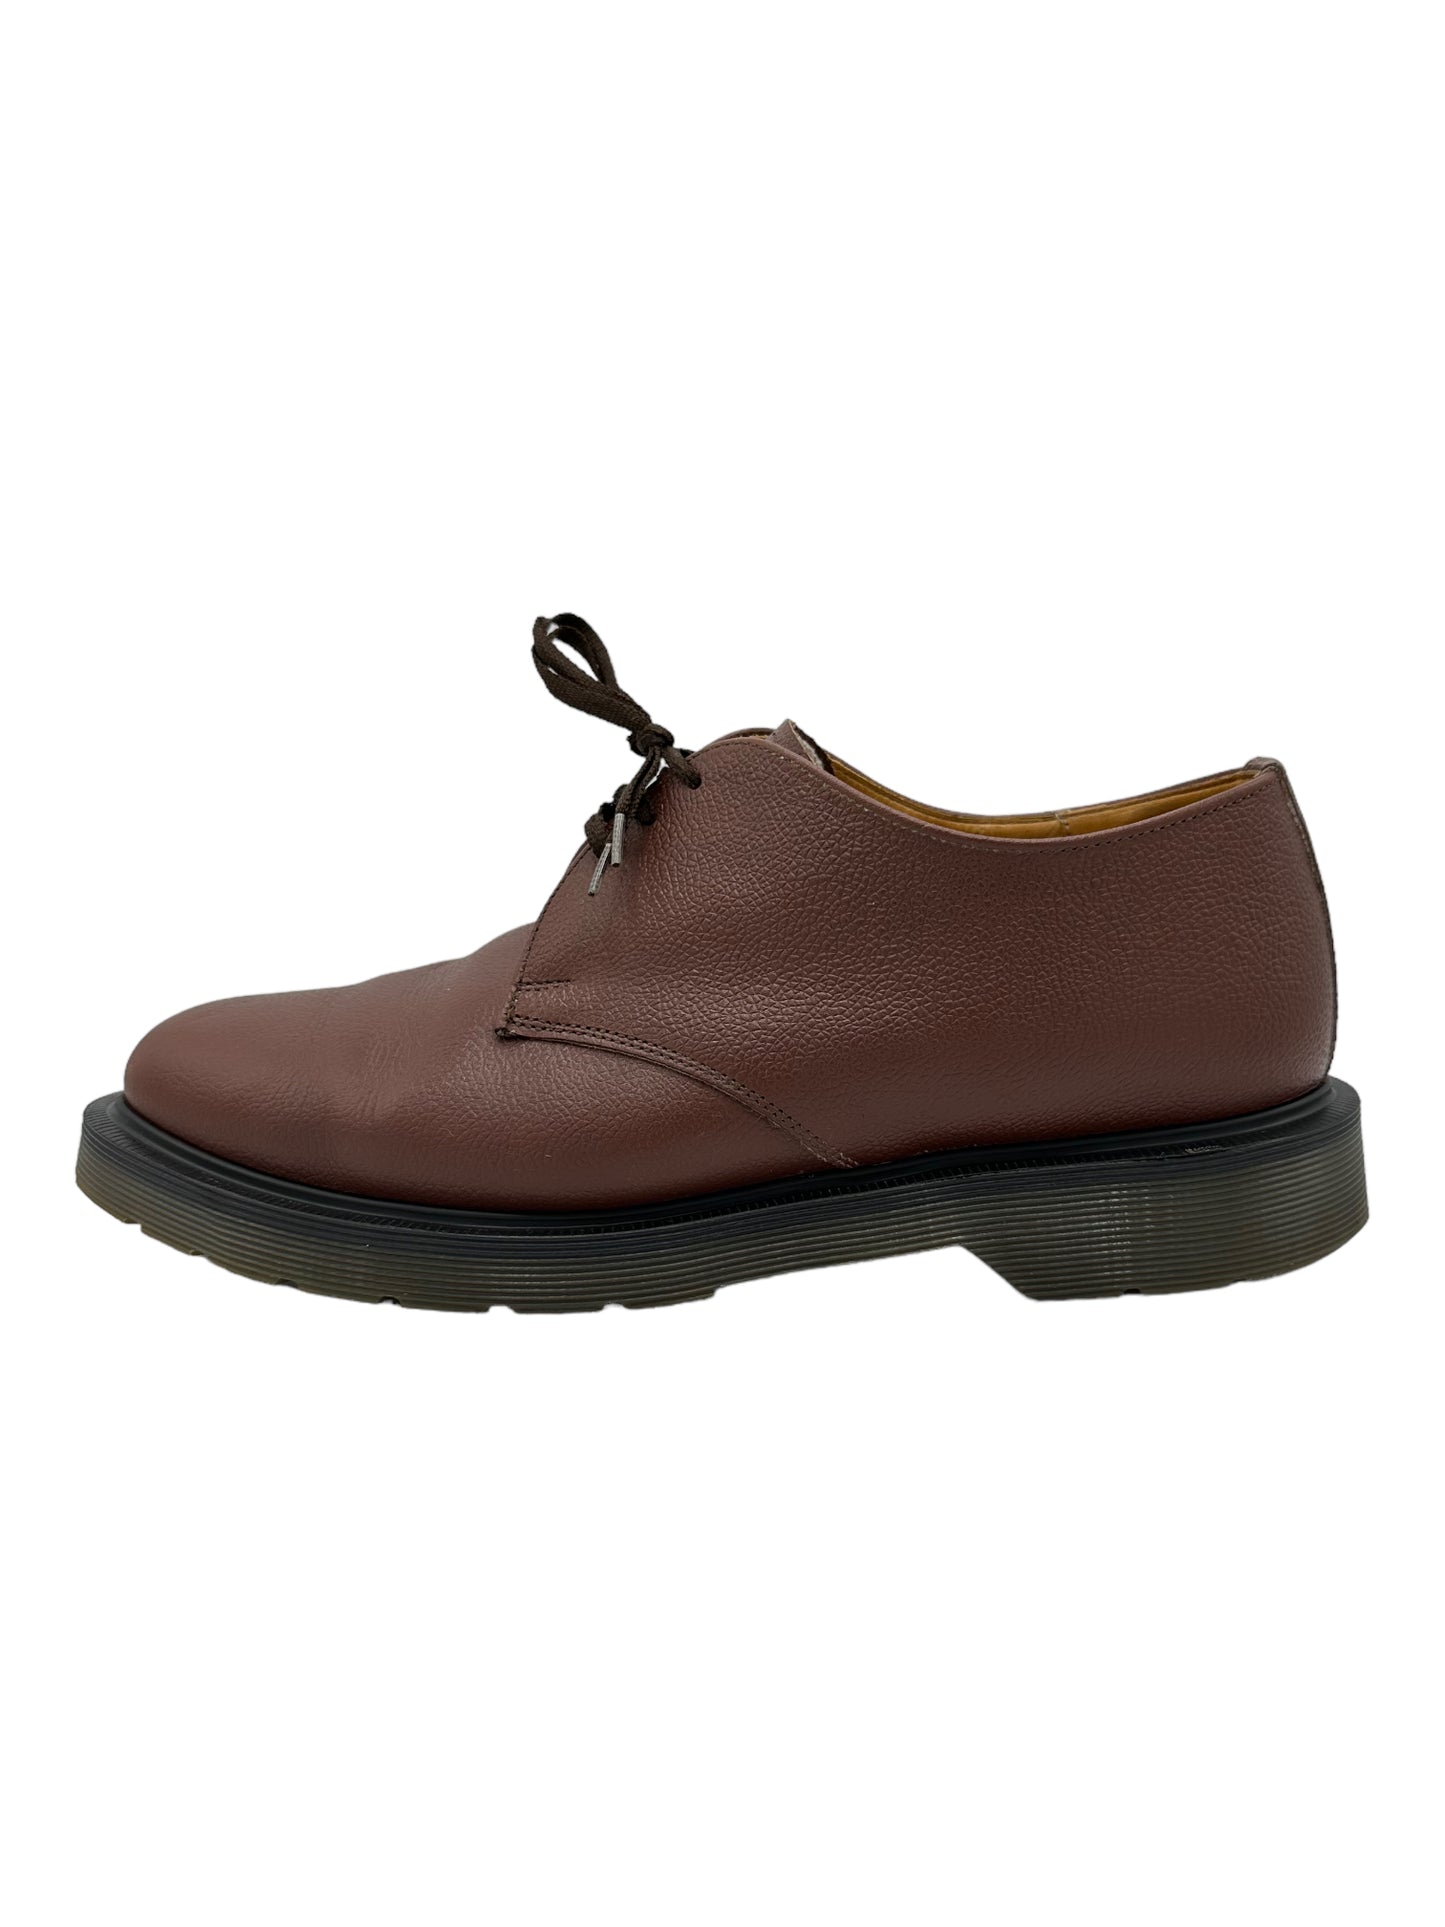 Solovair 'Made In England' Brown Greasy Grain Gibson Shoes